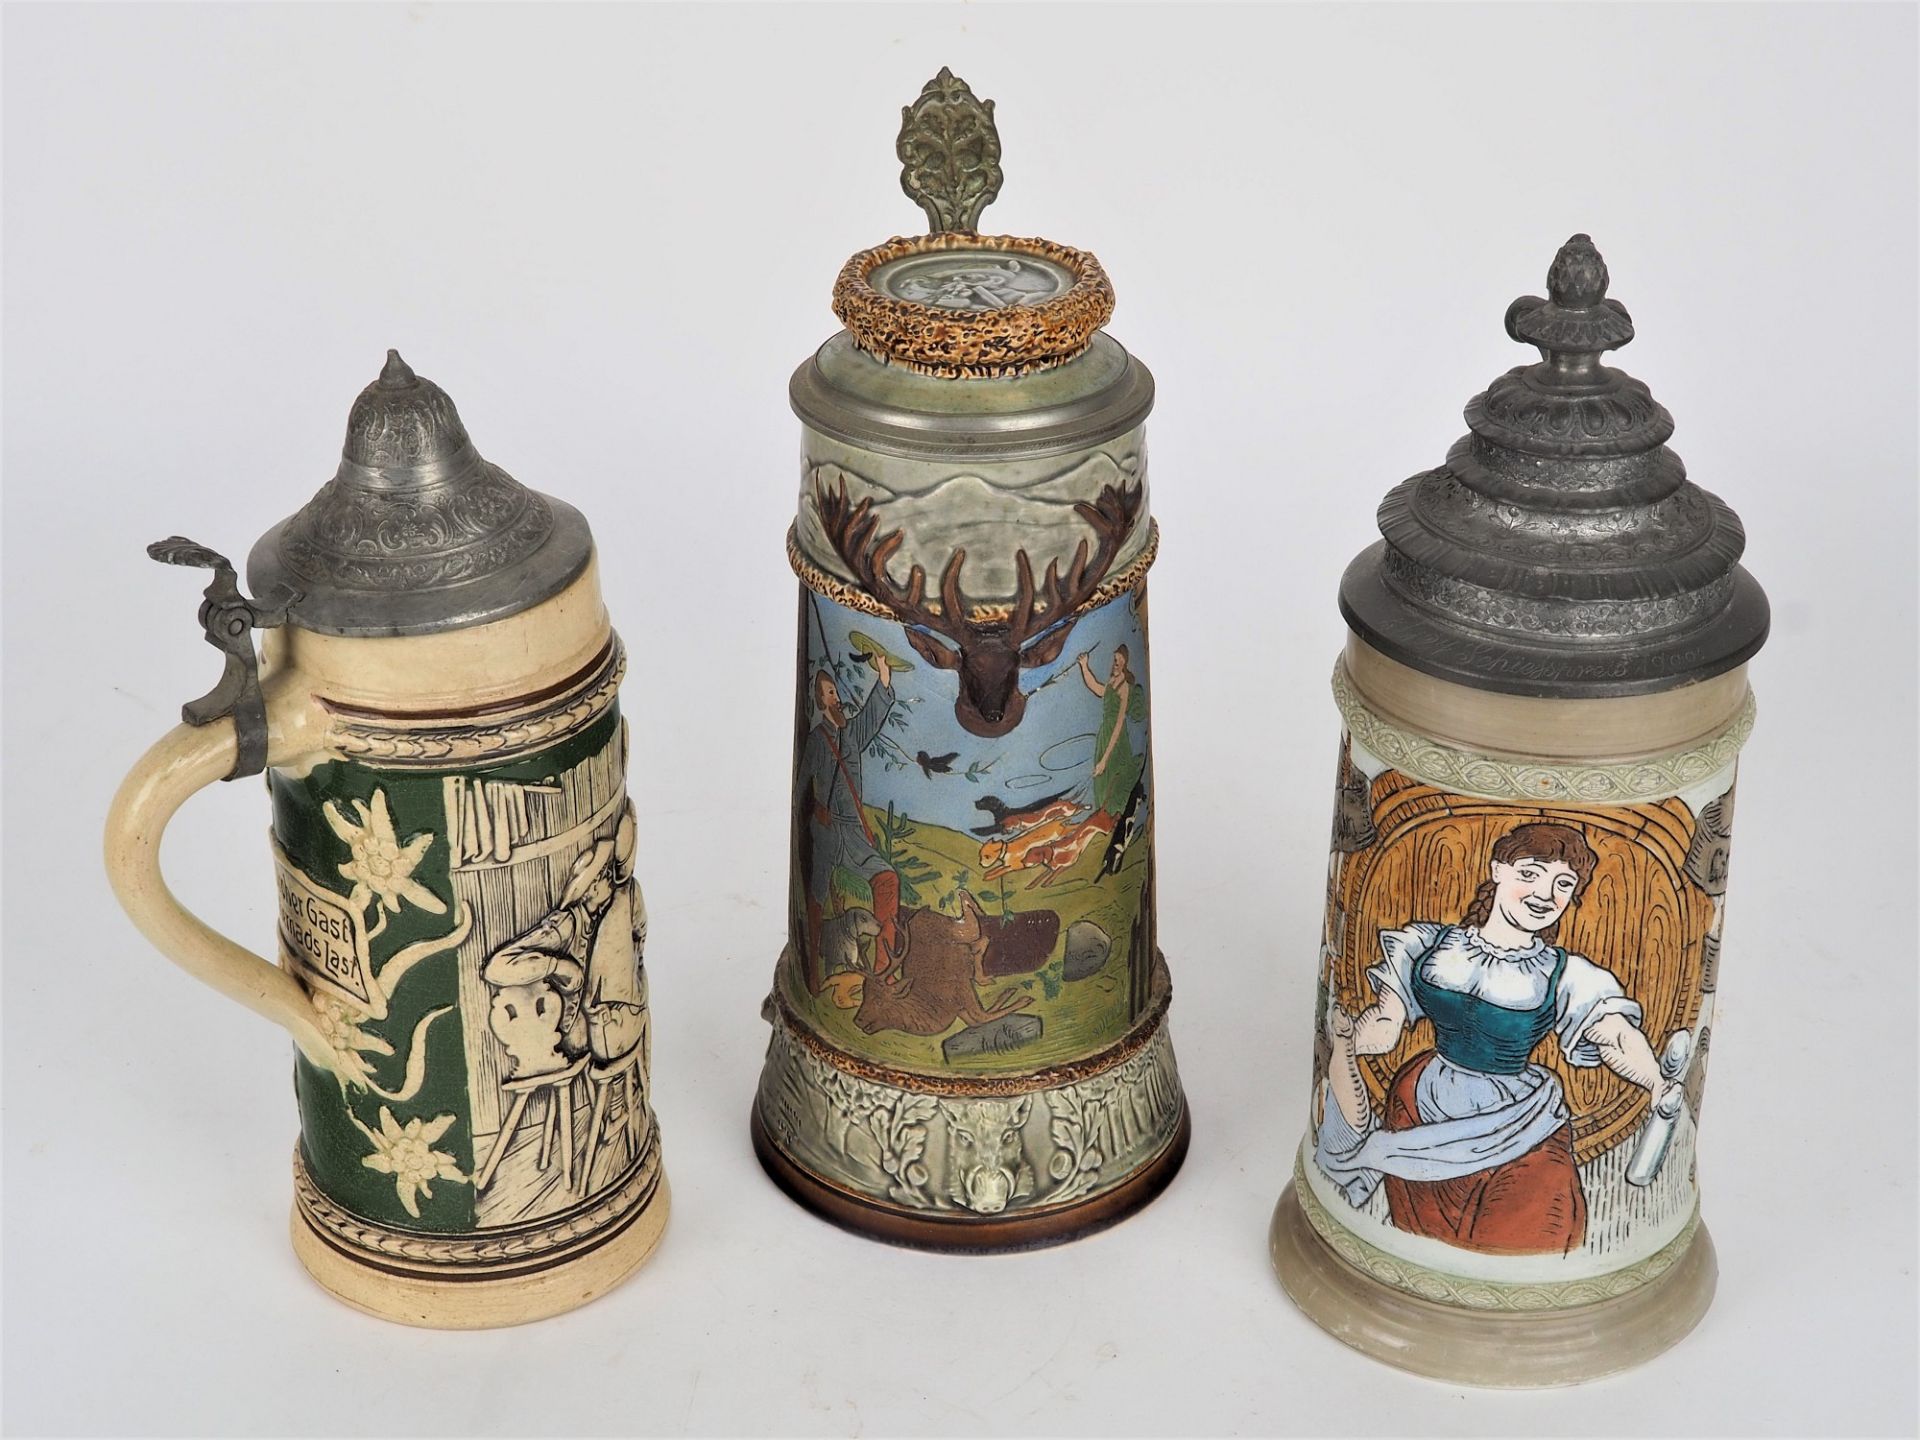 Beer mugs with relief pictures, 5 pieces, around 1900 - Image 3 of 4